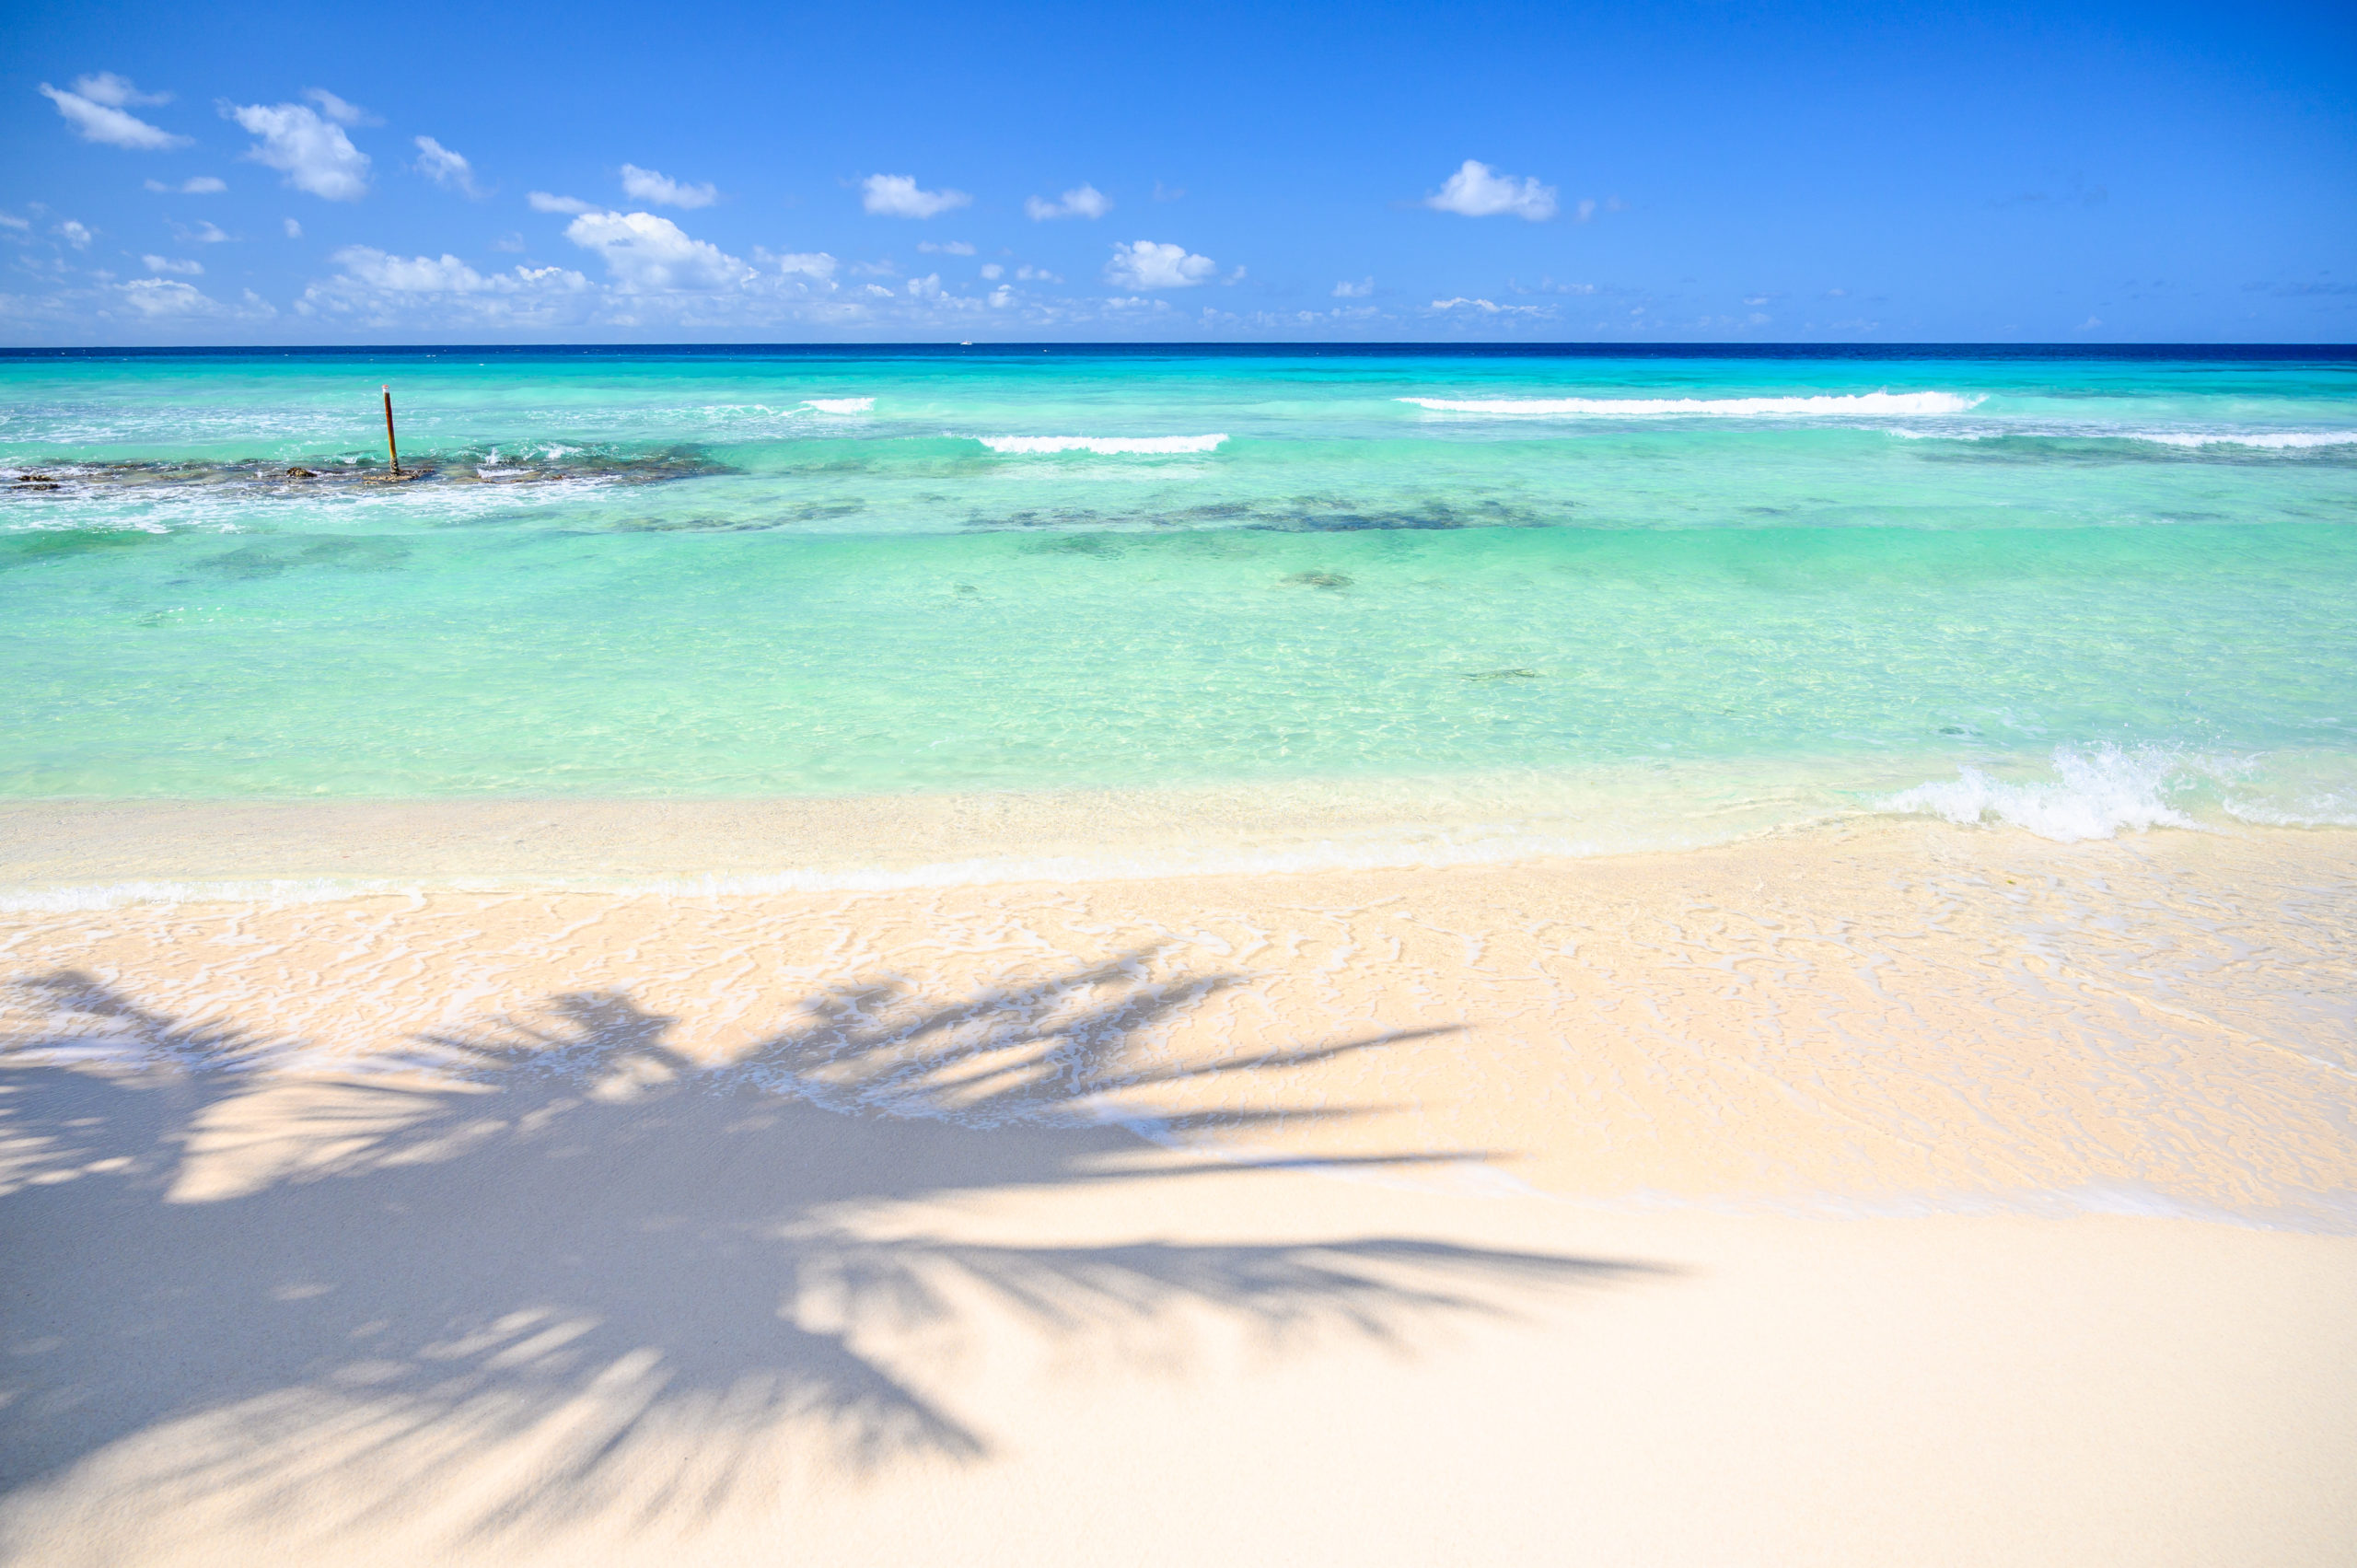 A Barbados Welcome Stamp could make this your office